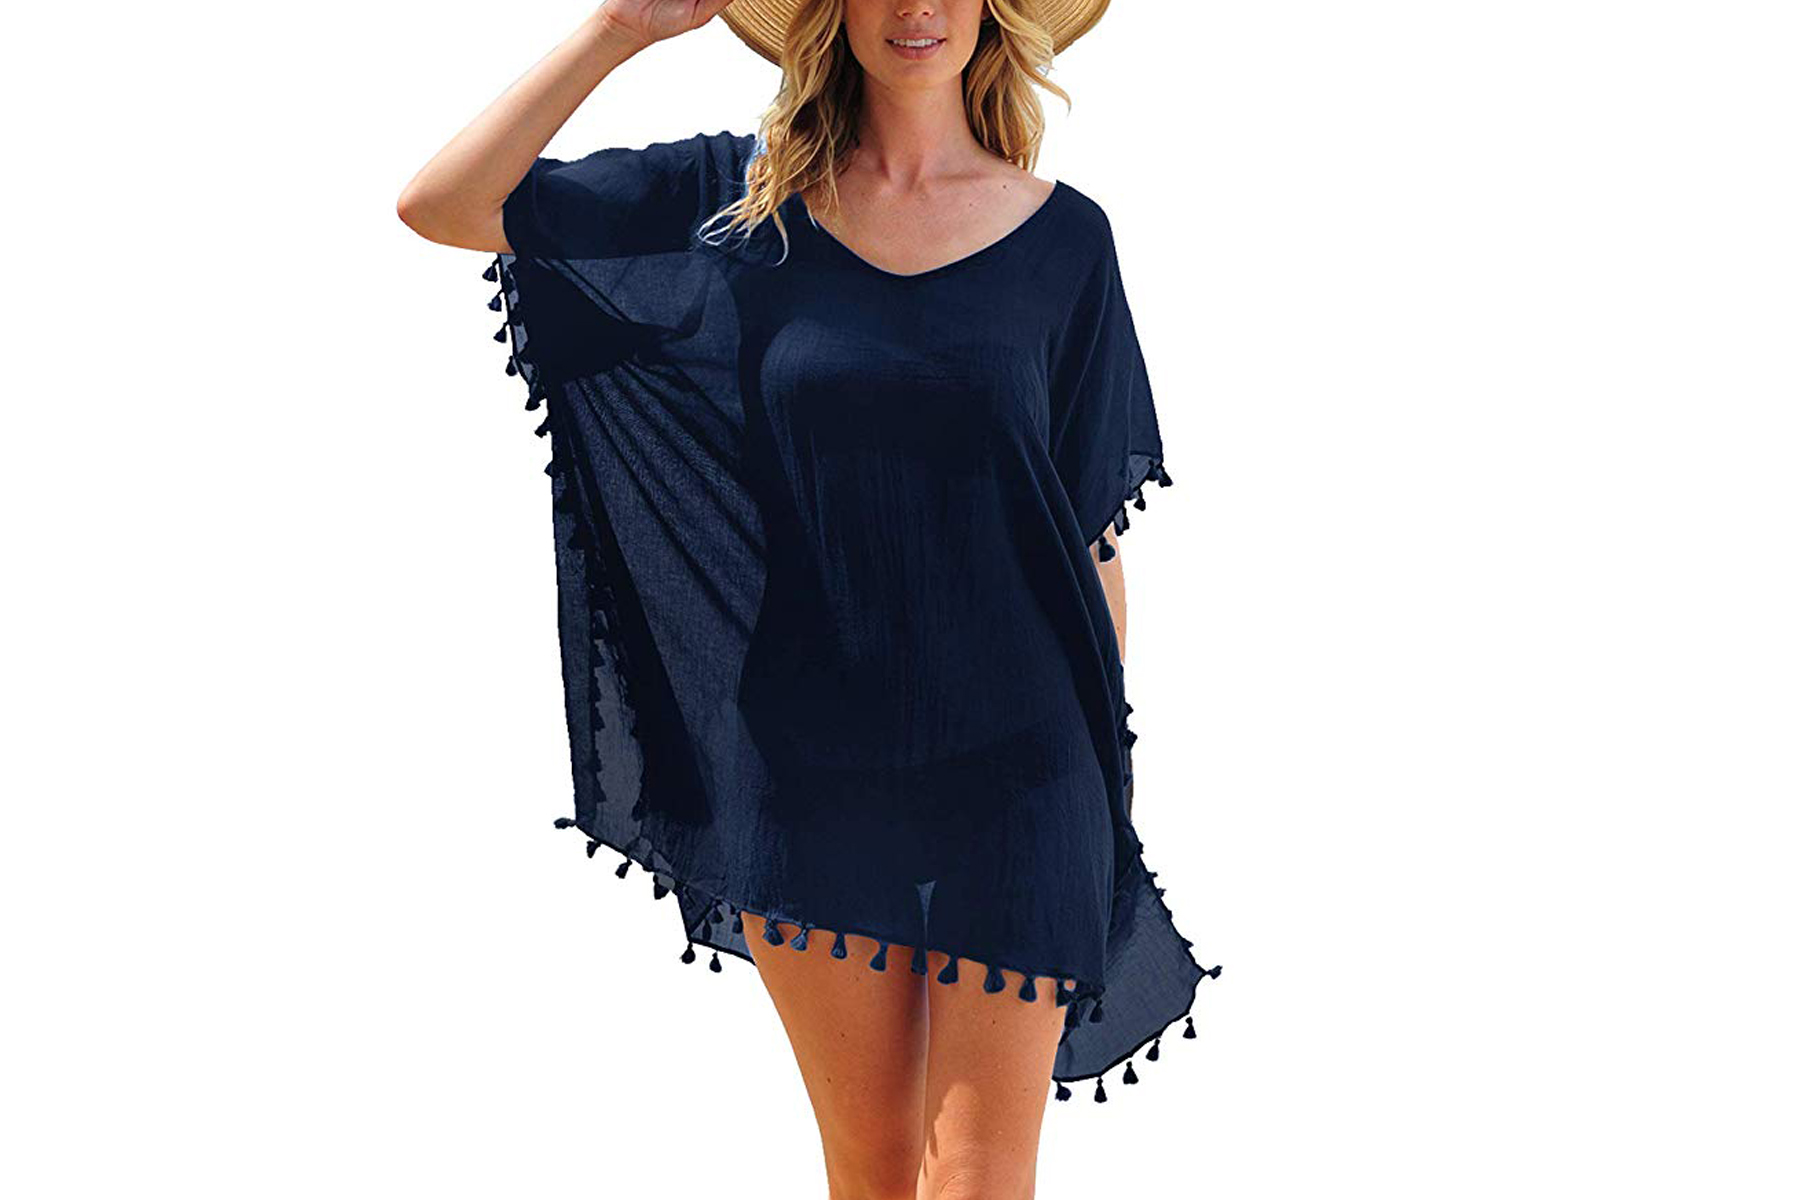 13 Best Beach Cover-Ups For Women Over 50